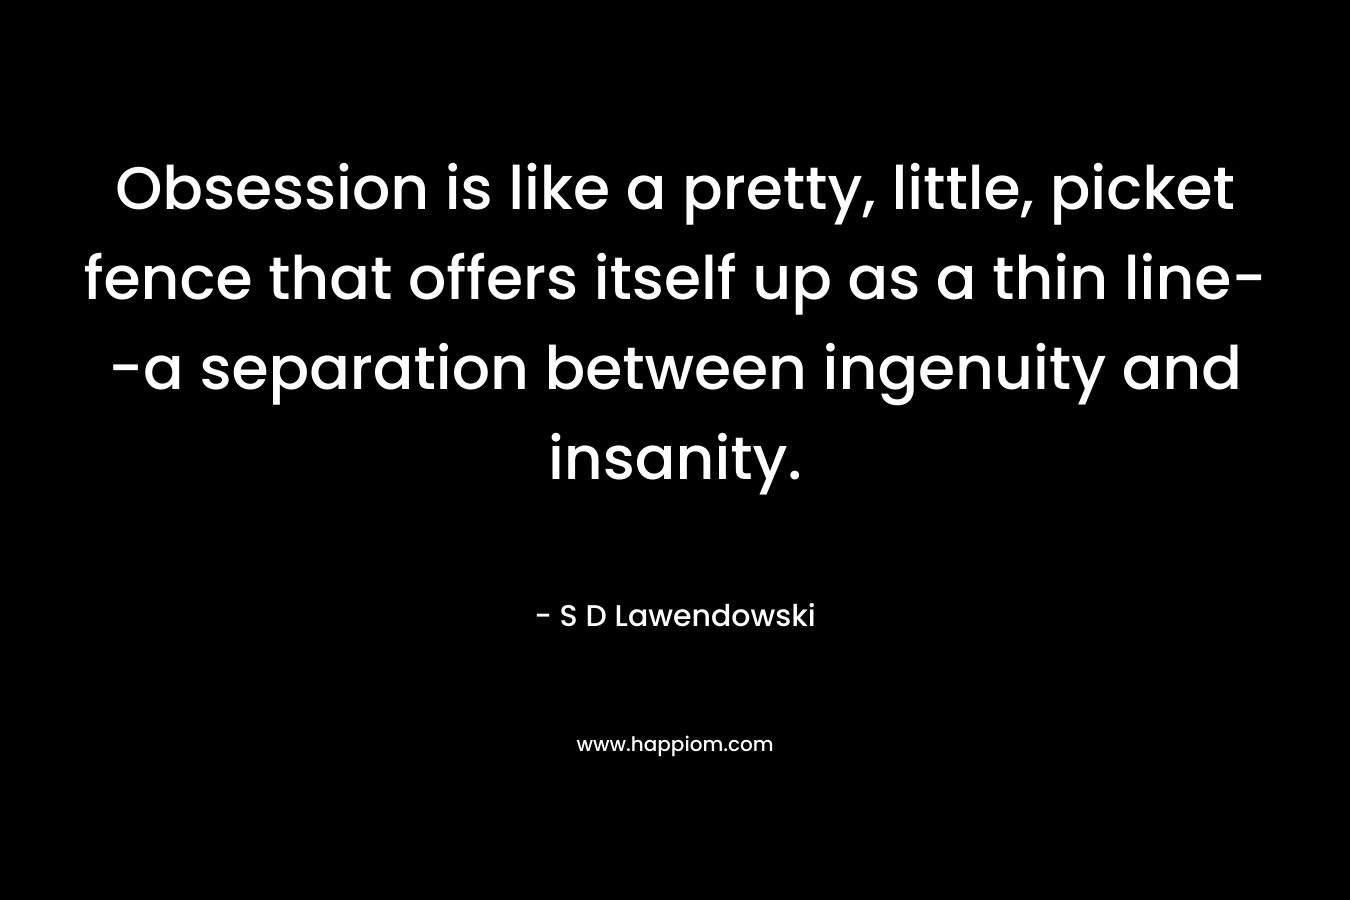 Obsession is like a pretty, little, picket fence that offers itself up as a thin line--a separation between ingenuity and insanity.